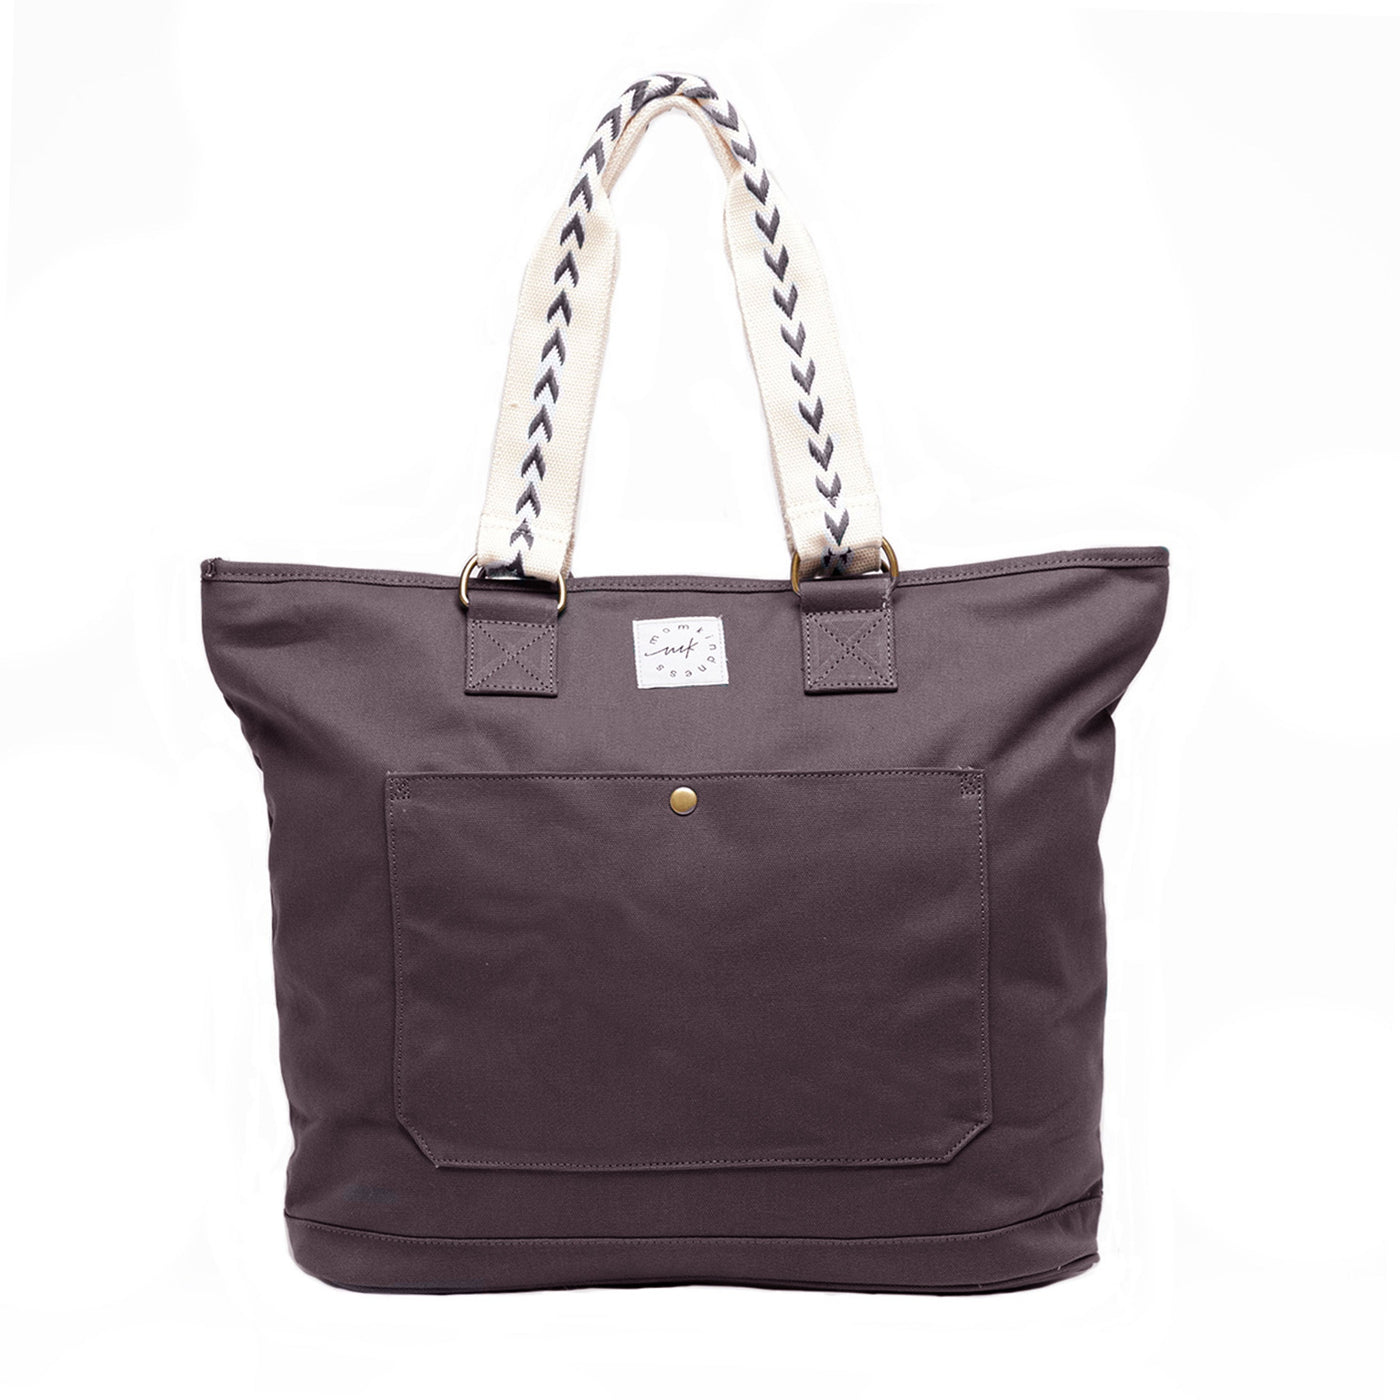 An extra-roomy canvas weekender tote in a graphite color with ivory embroidered shoulder straps with an arrow pattern, shown front-facing on a white background.